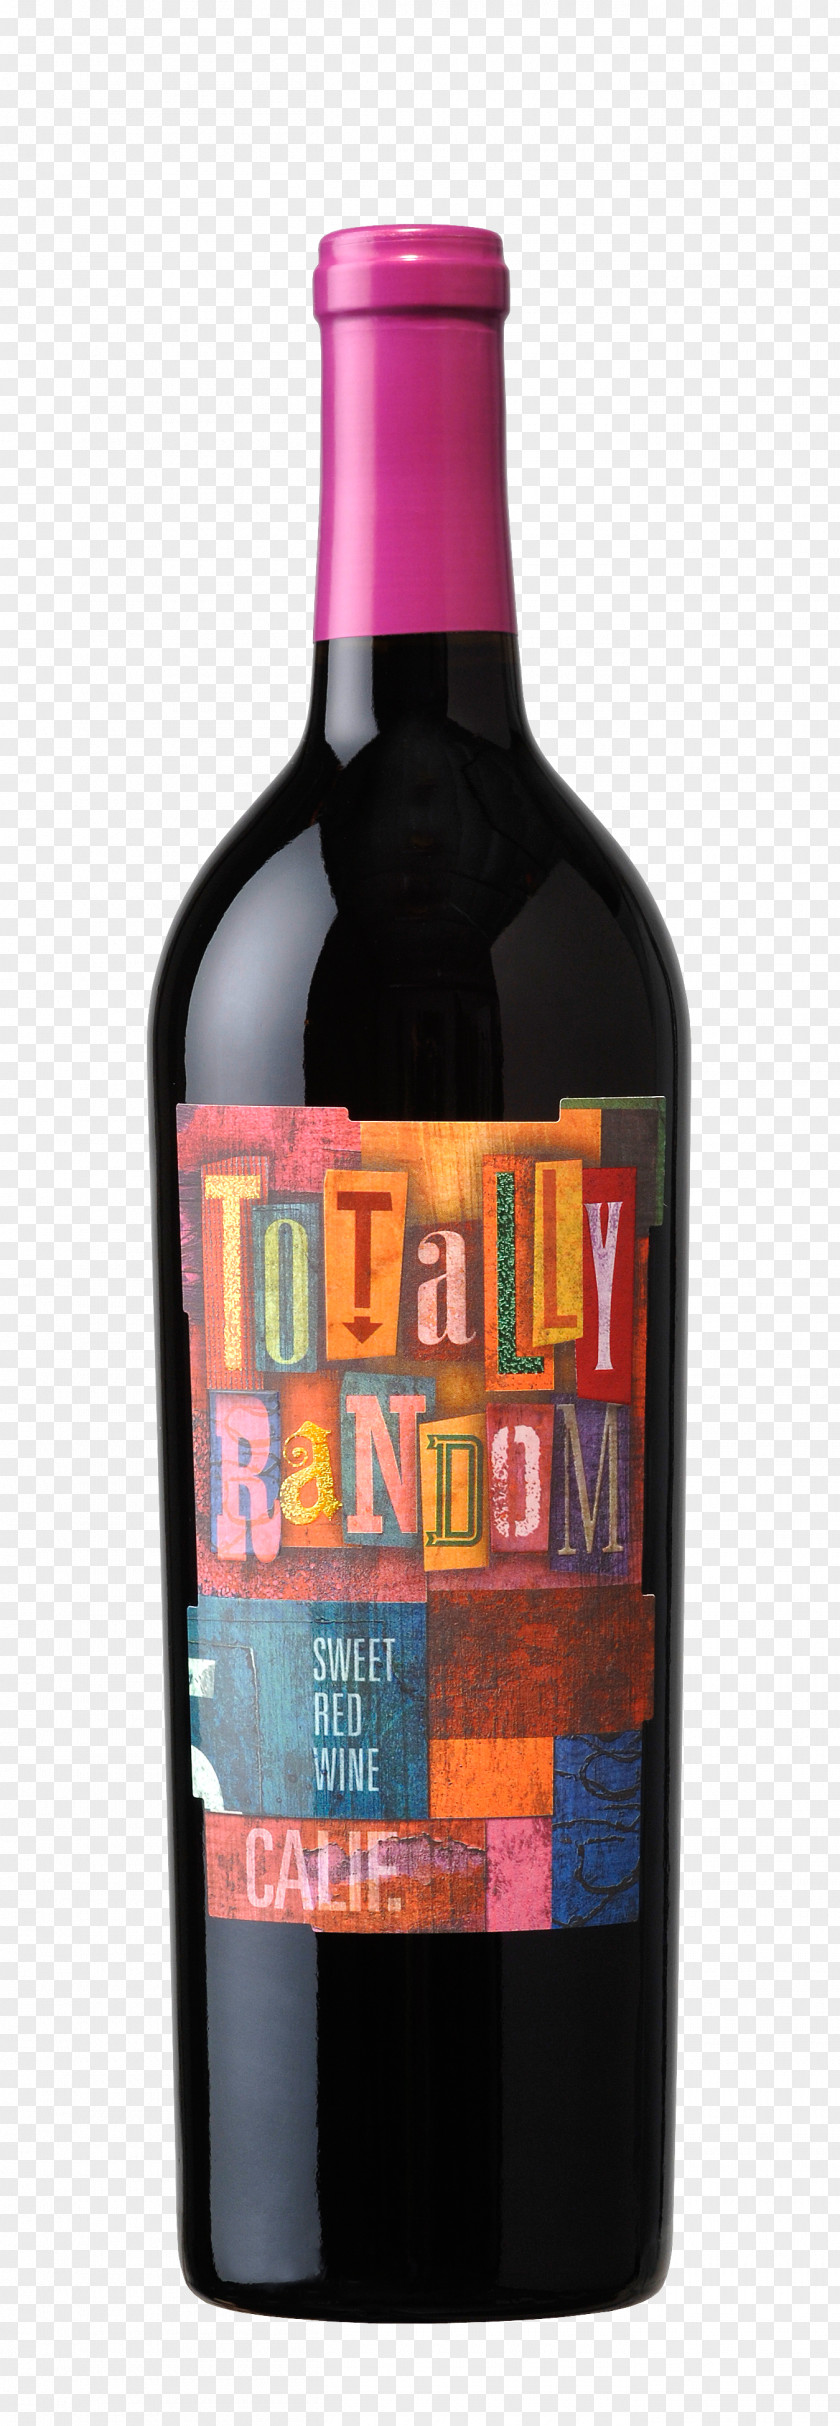 Bottle Image, Free Download Image Of Red Wine Shiraz Malbec Muscat PNG